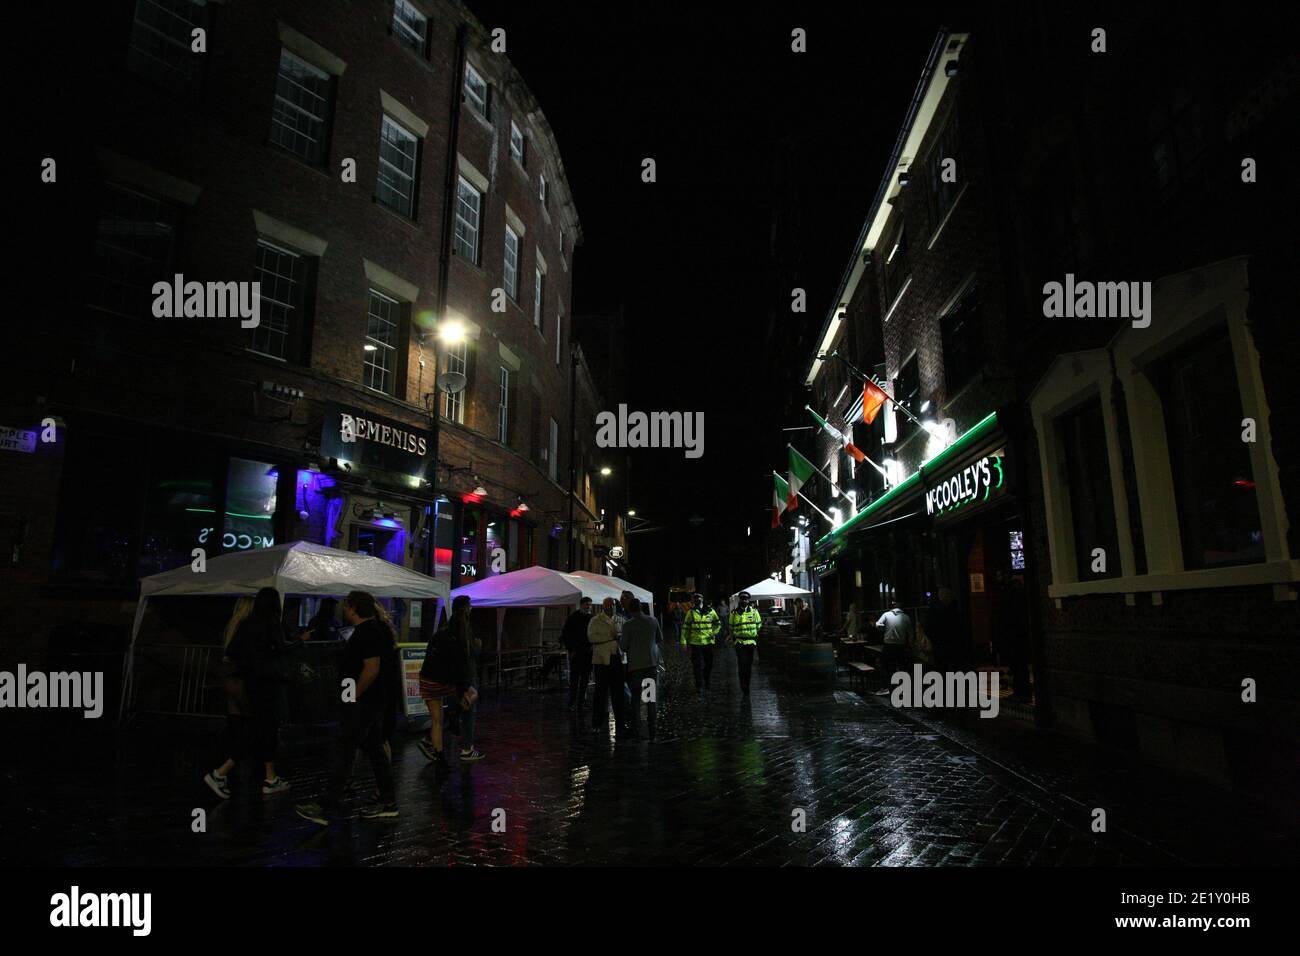 Liverpool, UK - October 10 2020: Police patrol Mathew Street on the last weekend before stricter lockdown measures are expected across the north. Stock Photo